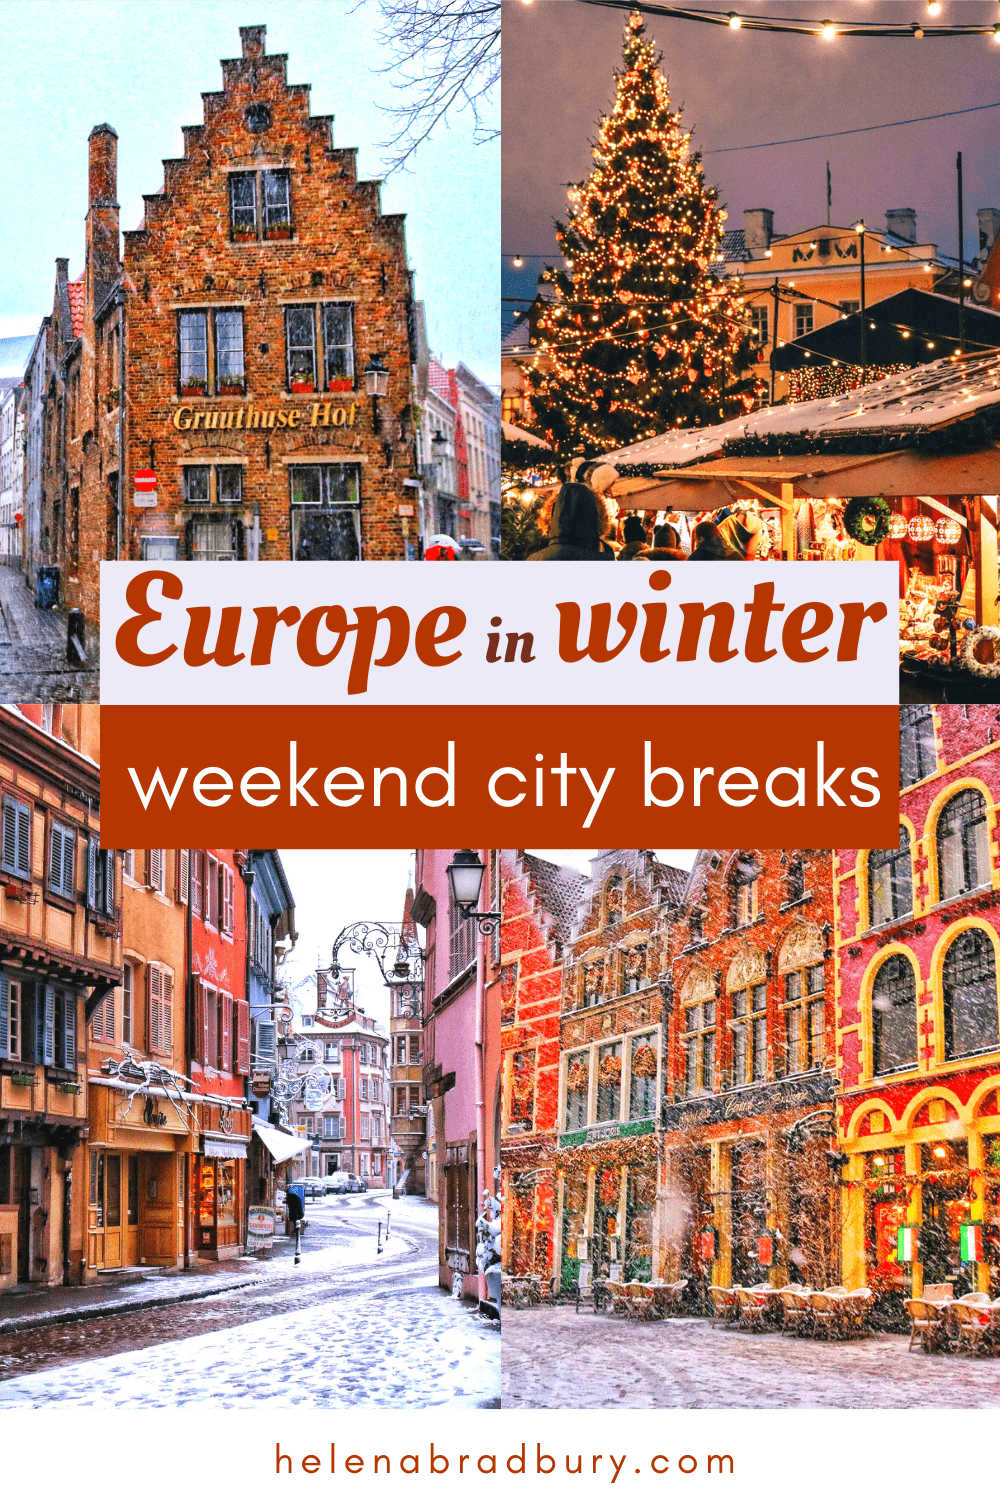 Winter can be a great time to see cities in Europe for cheap off-peak prices. This guide will give you ideas for cheap winter destinations in Europe, the best European cities to visit in winter and cheap European Christmas destinations to help you p…